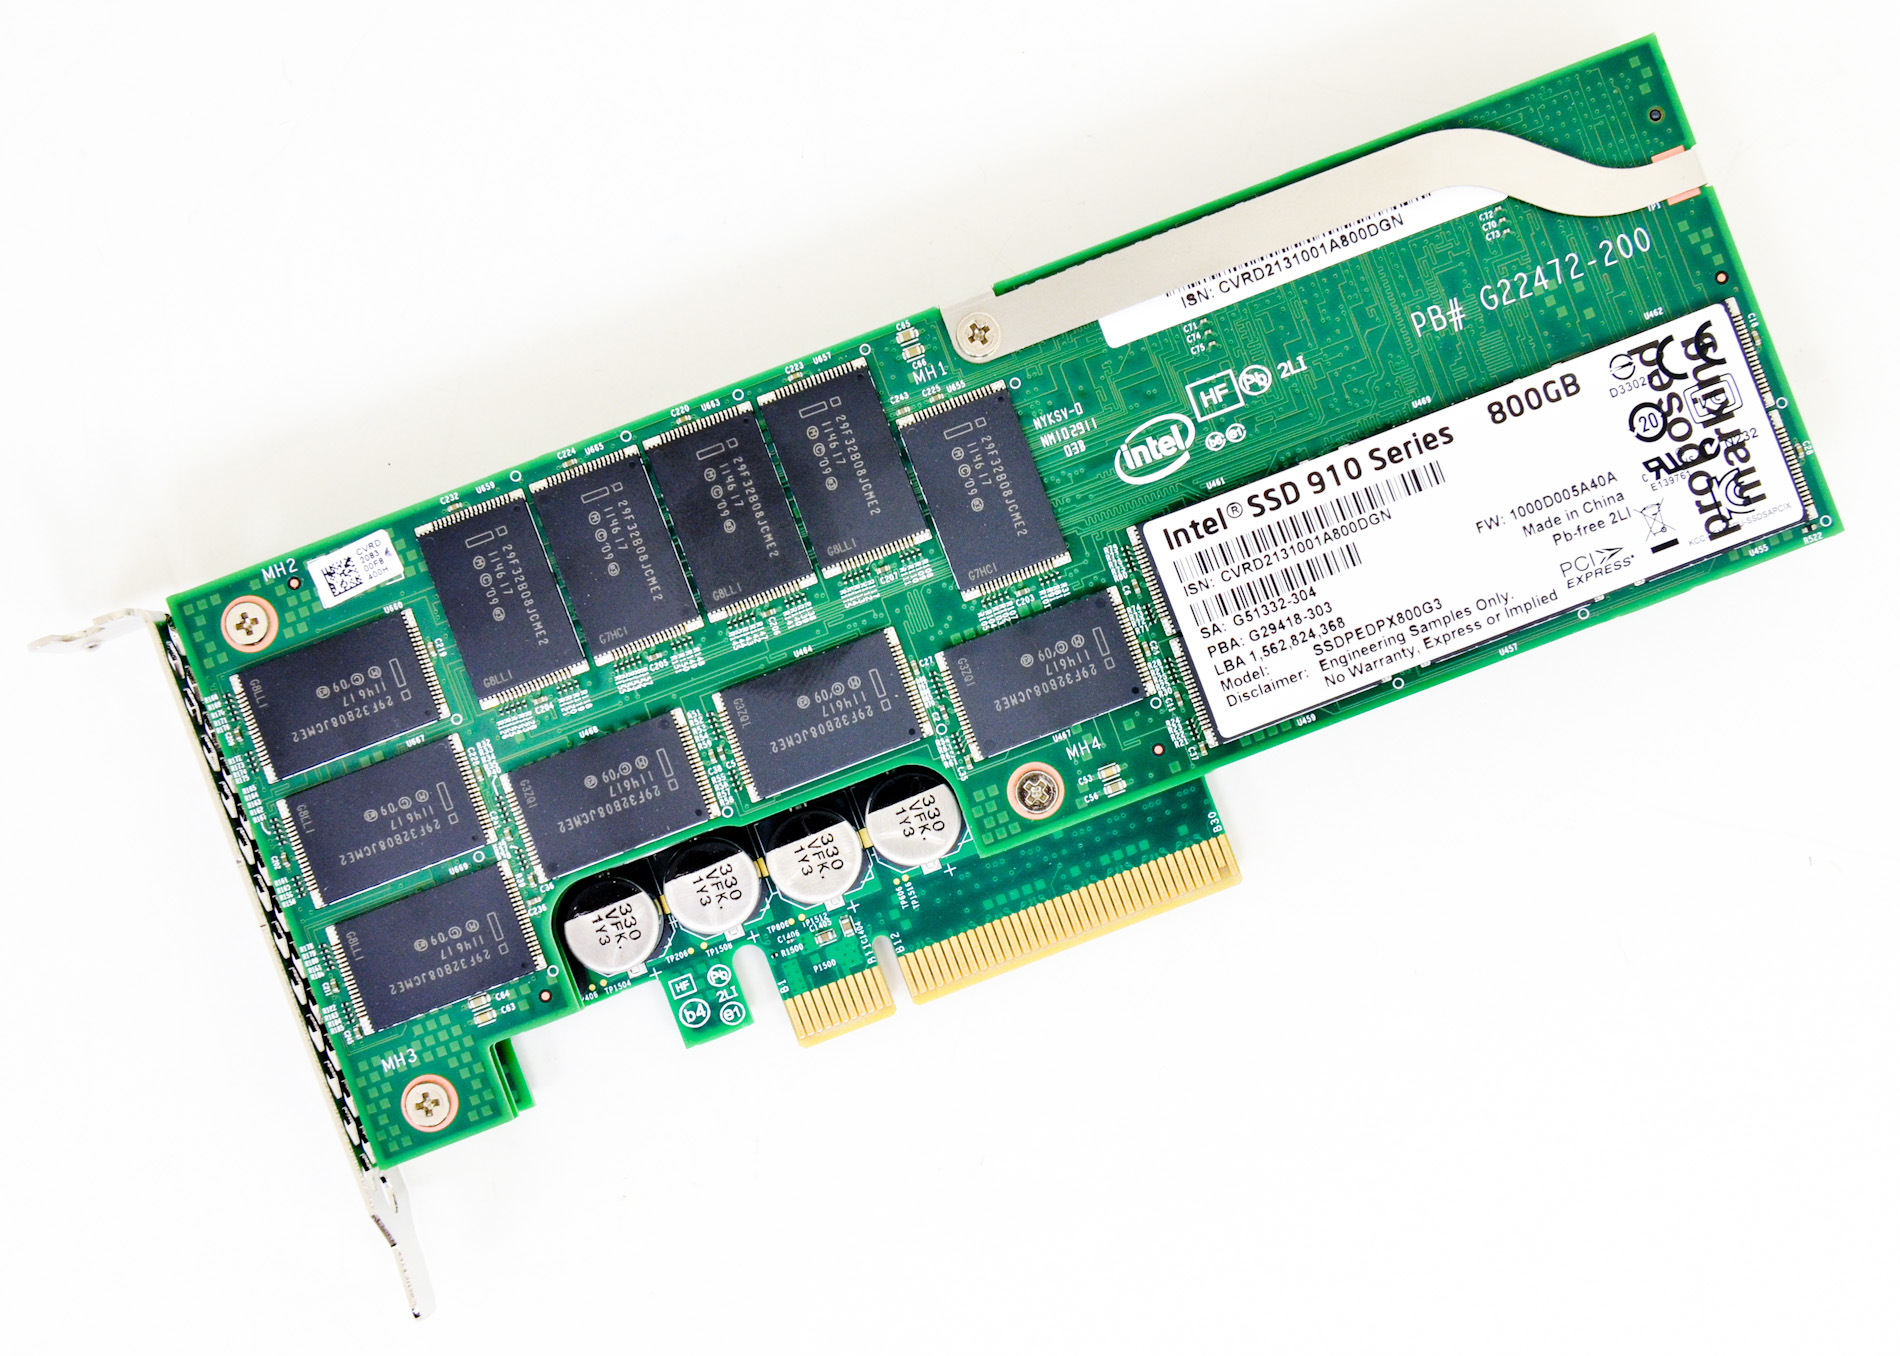 Citron Ulykke I The Drive and The Teardown - The Intel SSD 910 Review